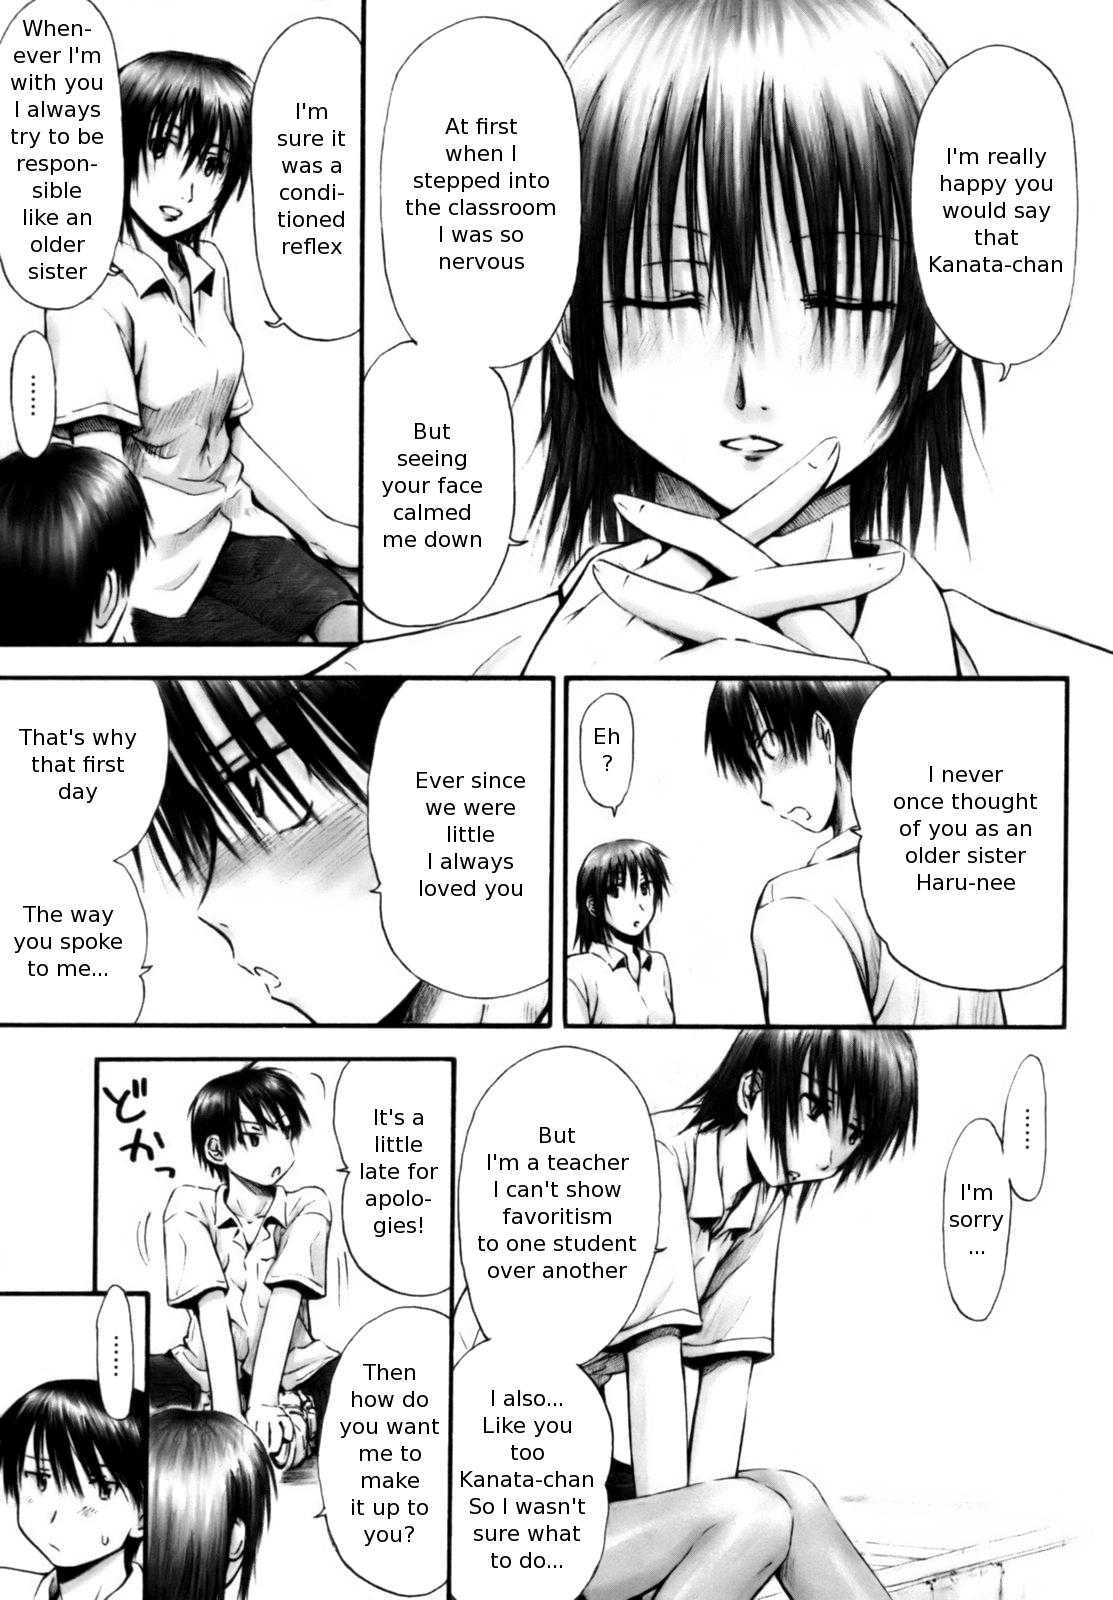 [Hagure Tanishi] All Day And All Night I Feel You (Complete) [English][Decensored] 